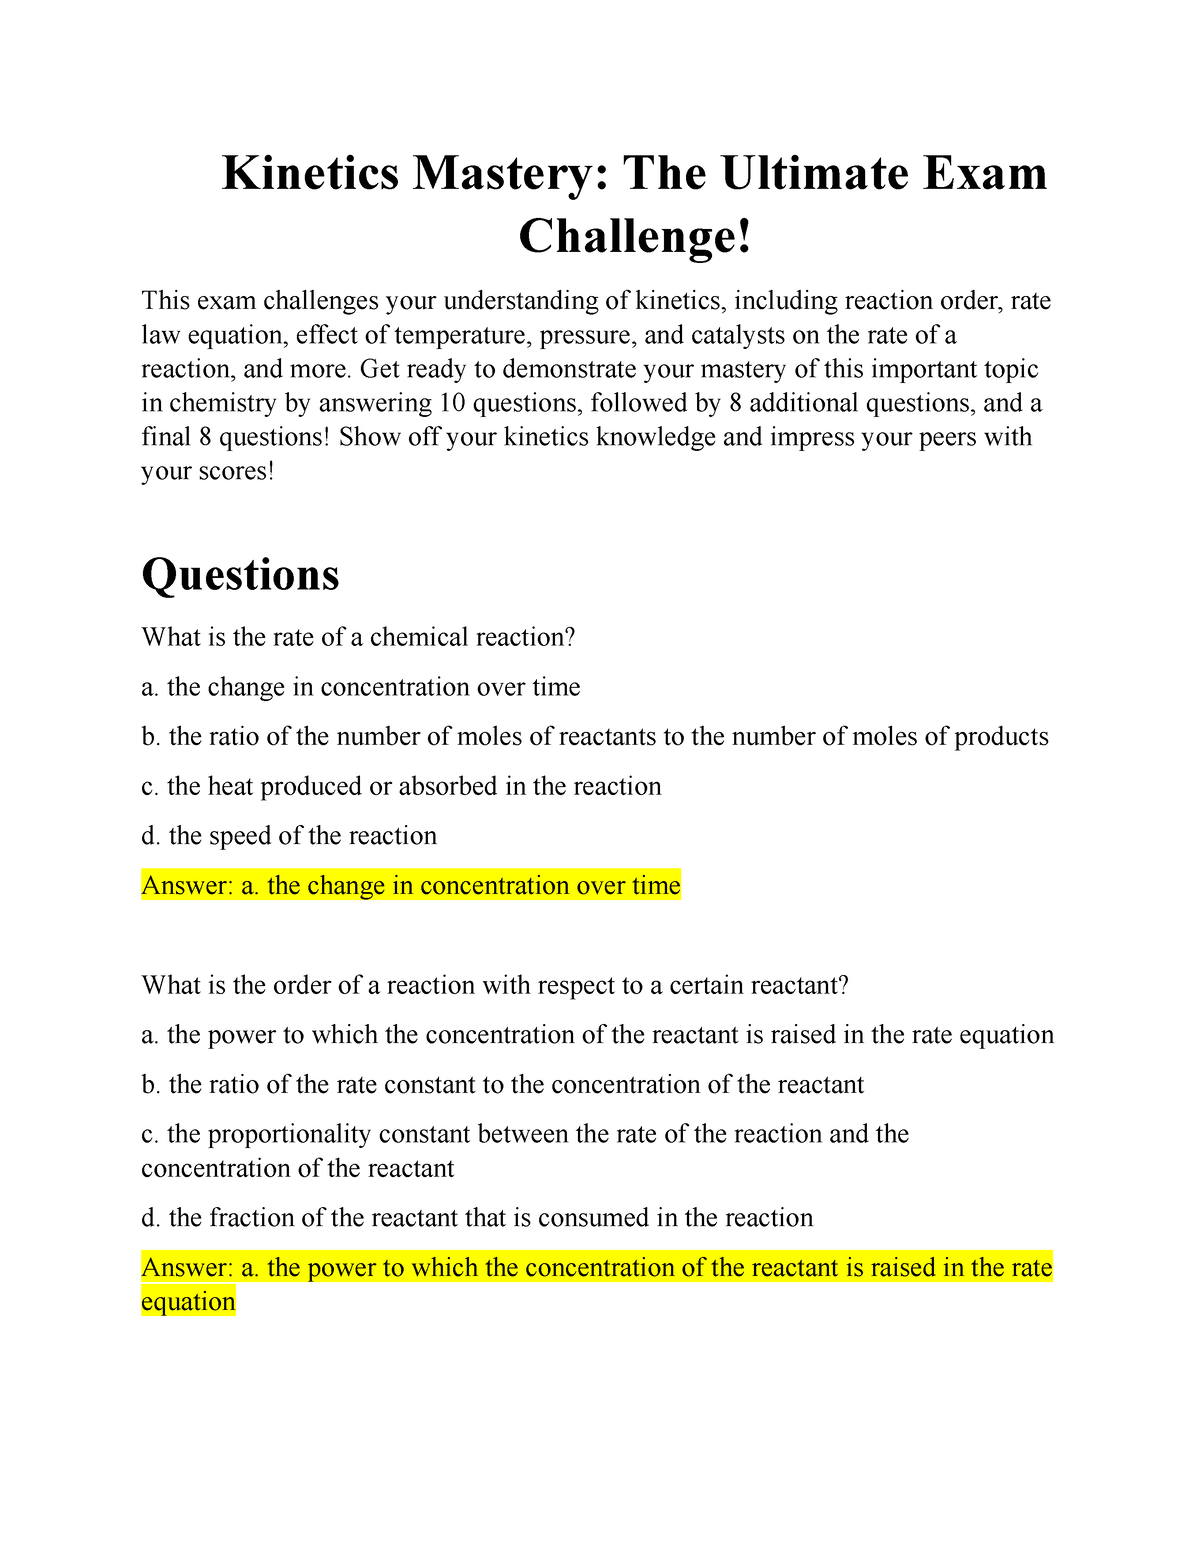 kinetics-mastery-get-ready-to-demonstrate-your-mastery-of-this-important-topic-in-chemistry-by